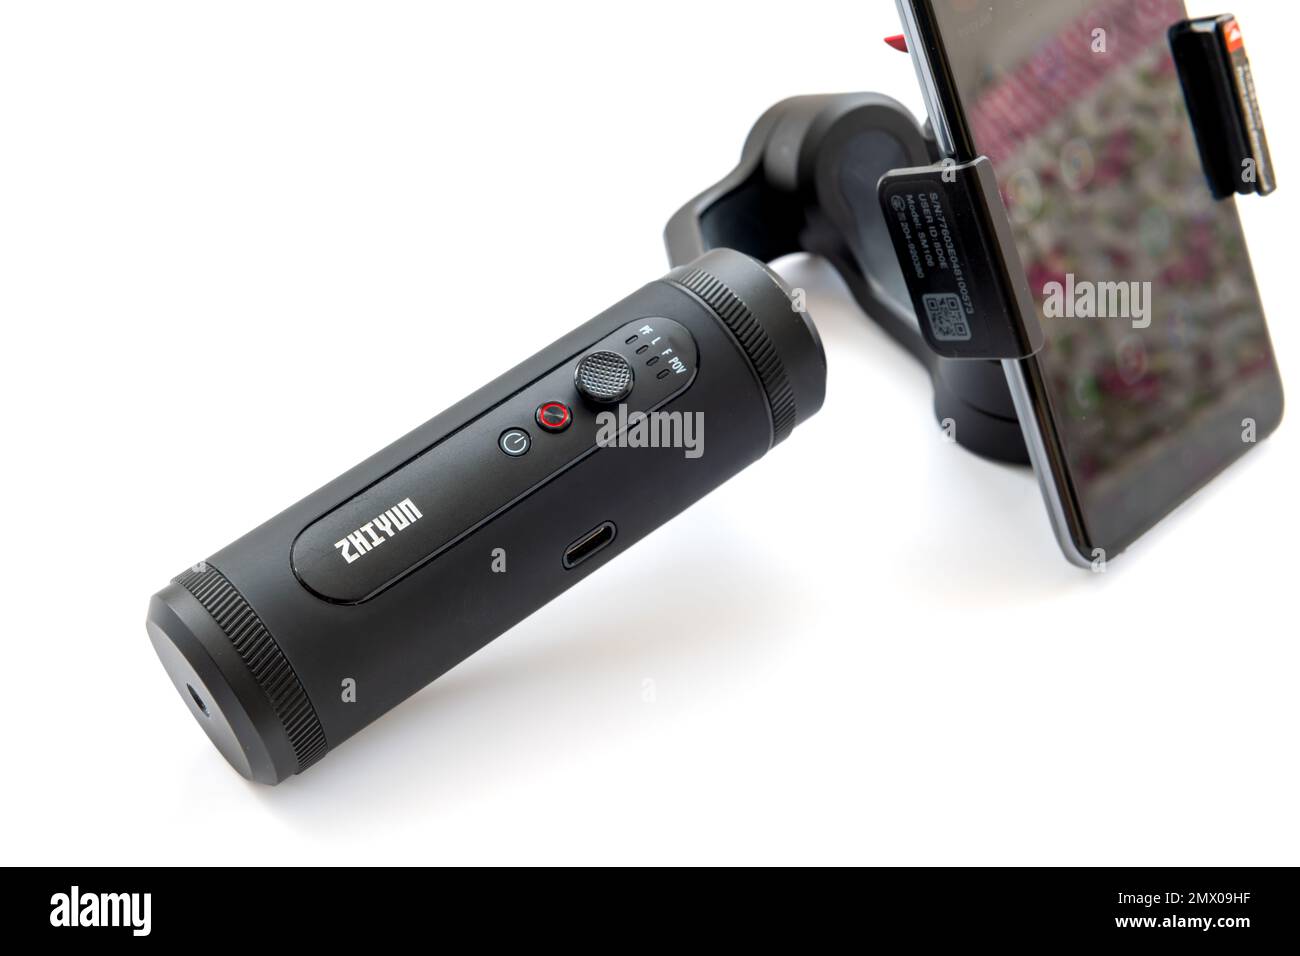 London. UK- 02.01.2023. A Zhiyun handheld gimbal stabilizer with a smart phone attached isolated in white. Stock Photo